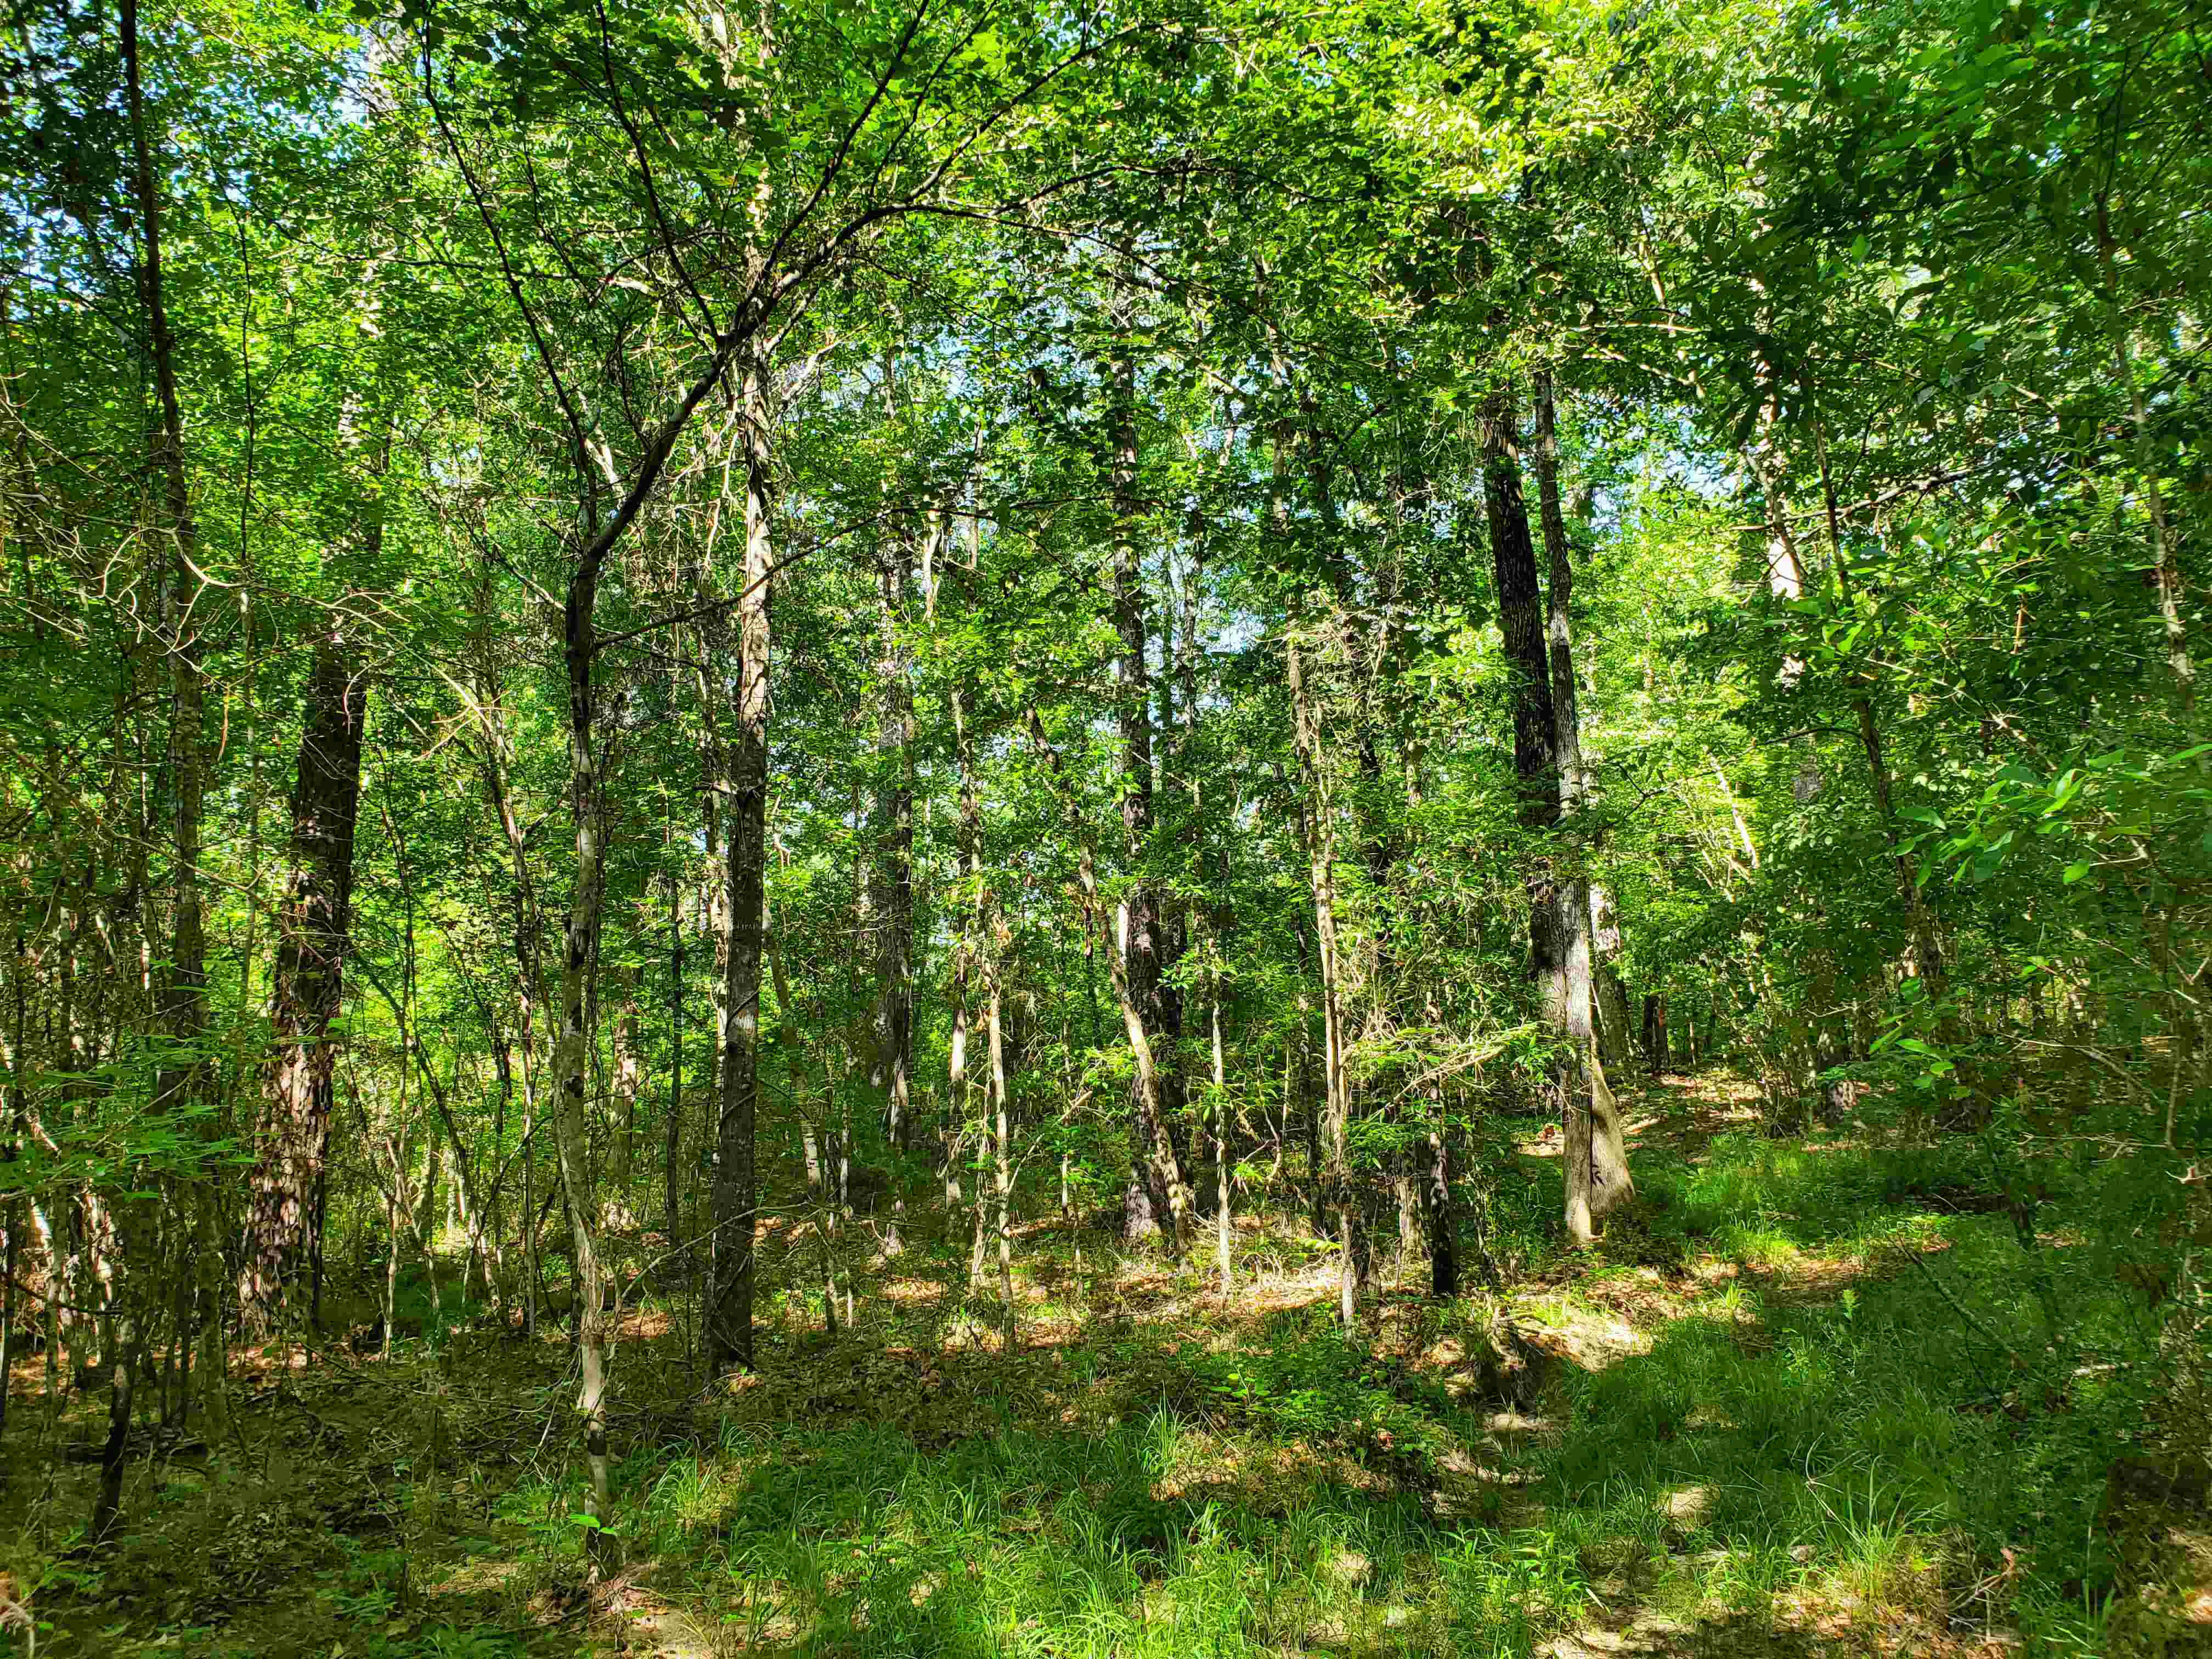 Lots of shady woods and mature hardwood